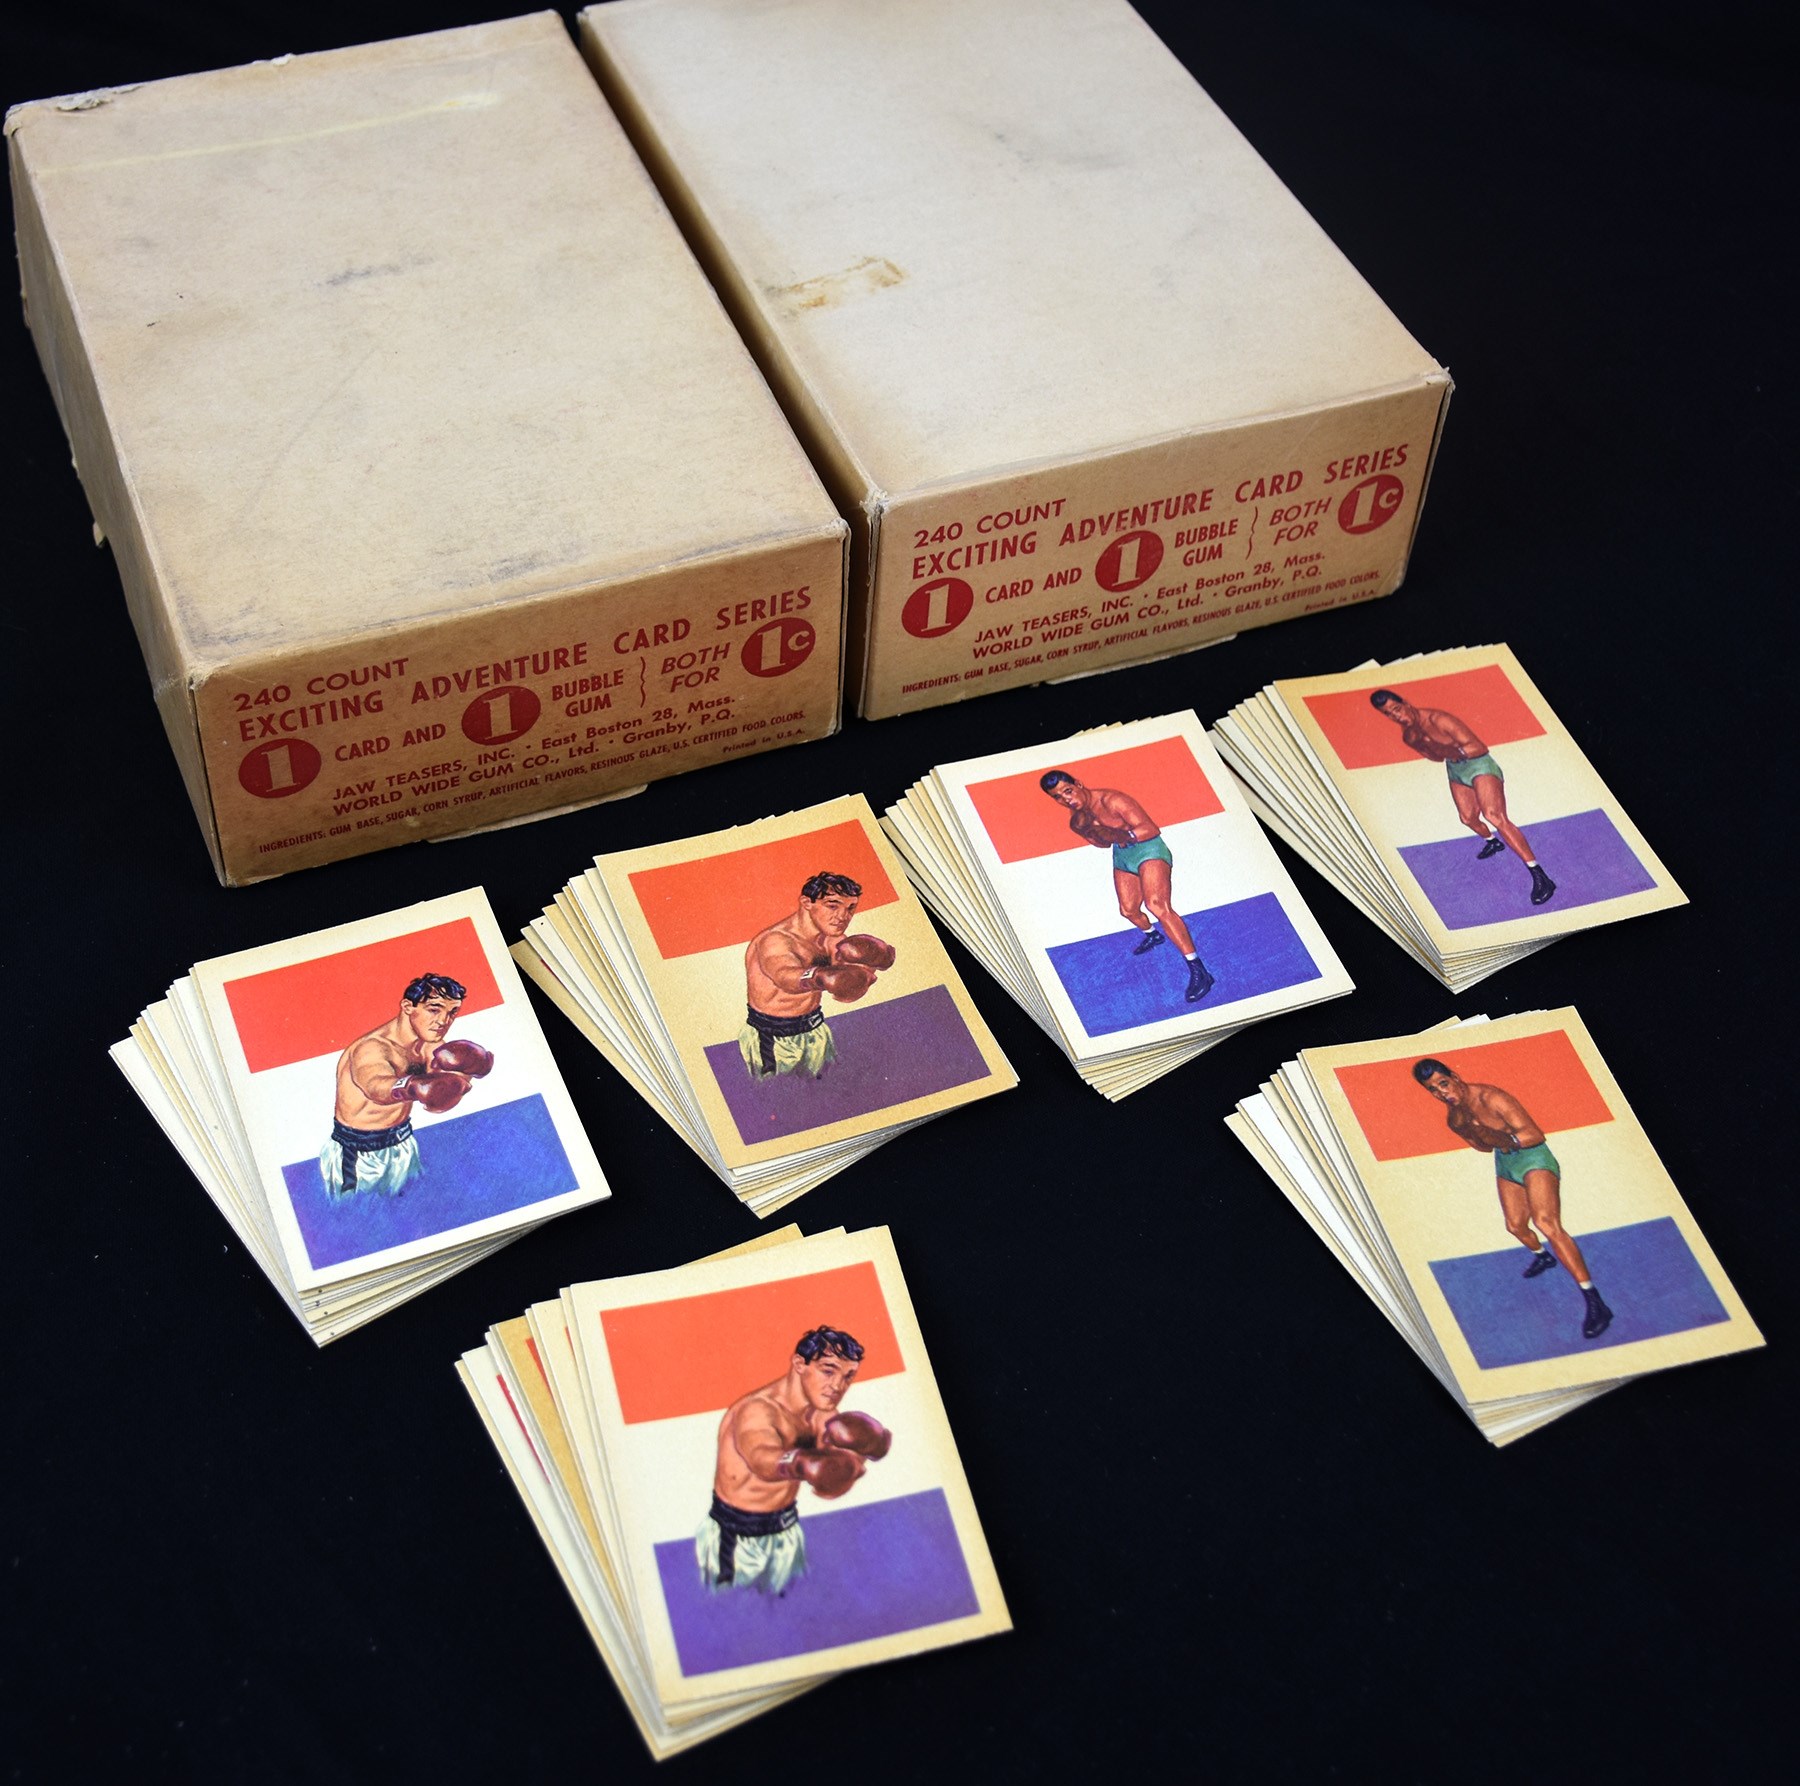 Boxing Cards - Hoard of High Grade Joe Louis & Rocky Marciano 1956 Adventure Cards with Two Display Boxes